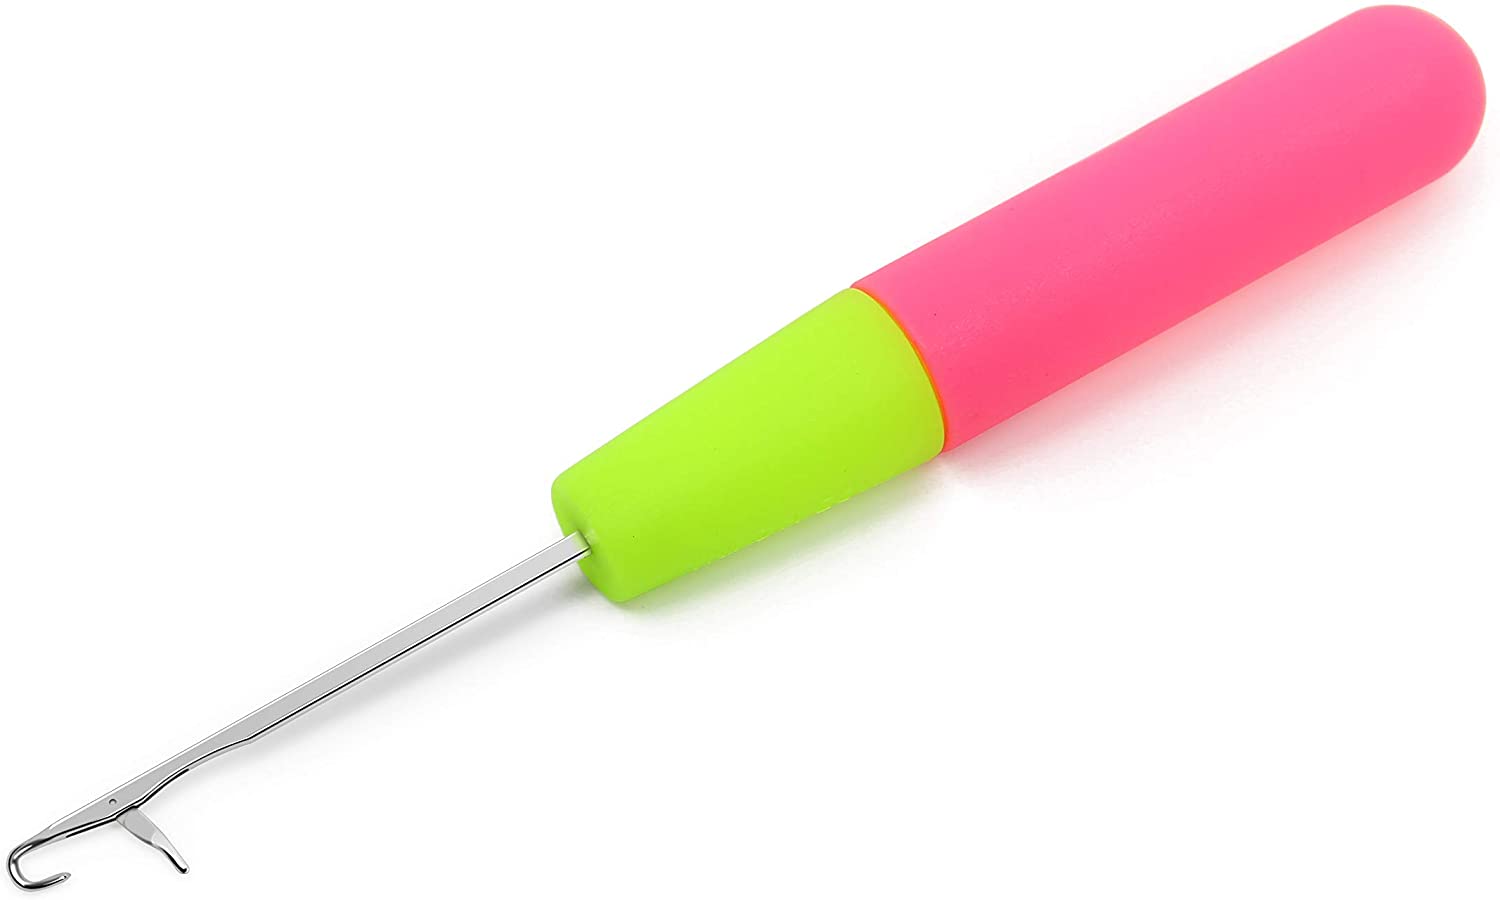 Crochet Needle for Hair Styling